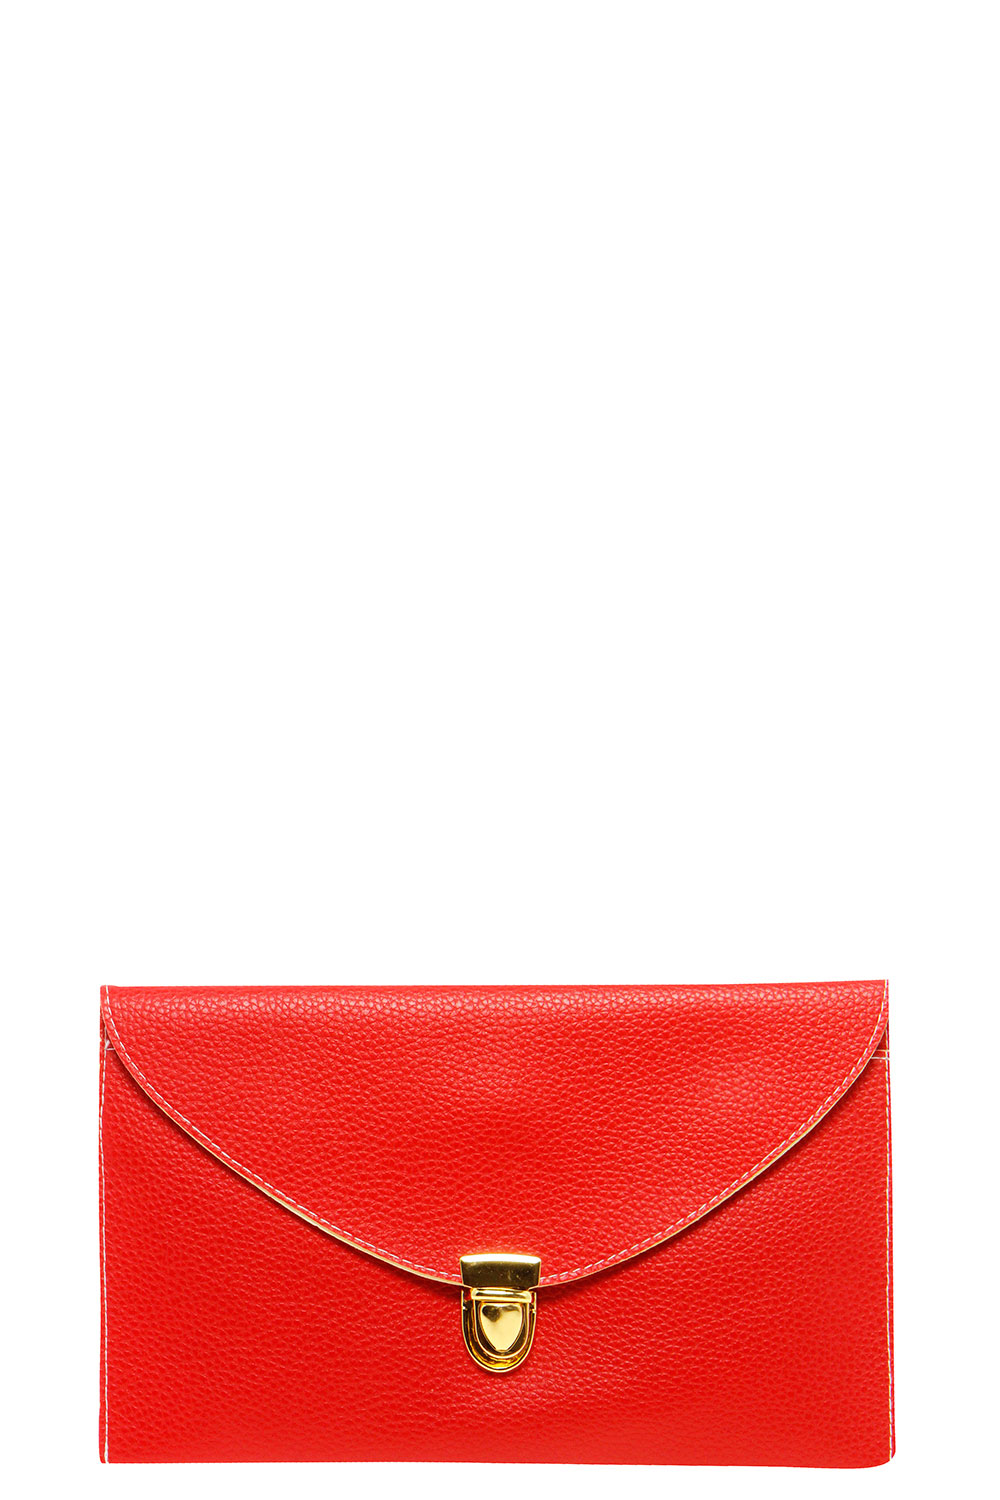 Lily Clasp Fasten Clutch Bag - red, red